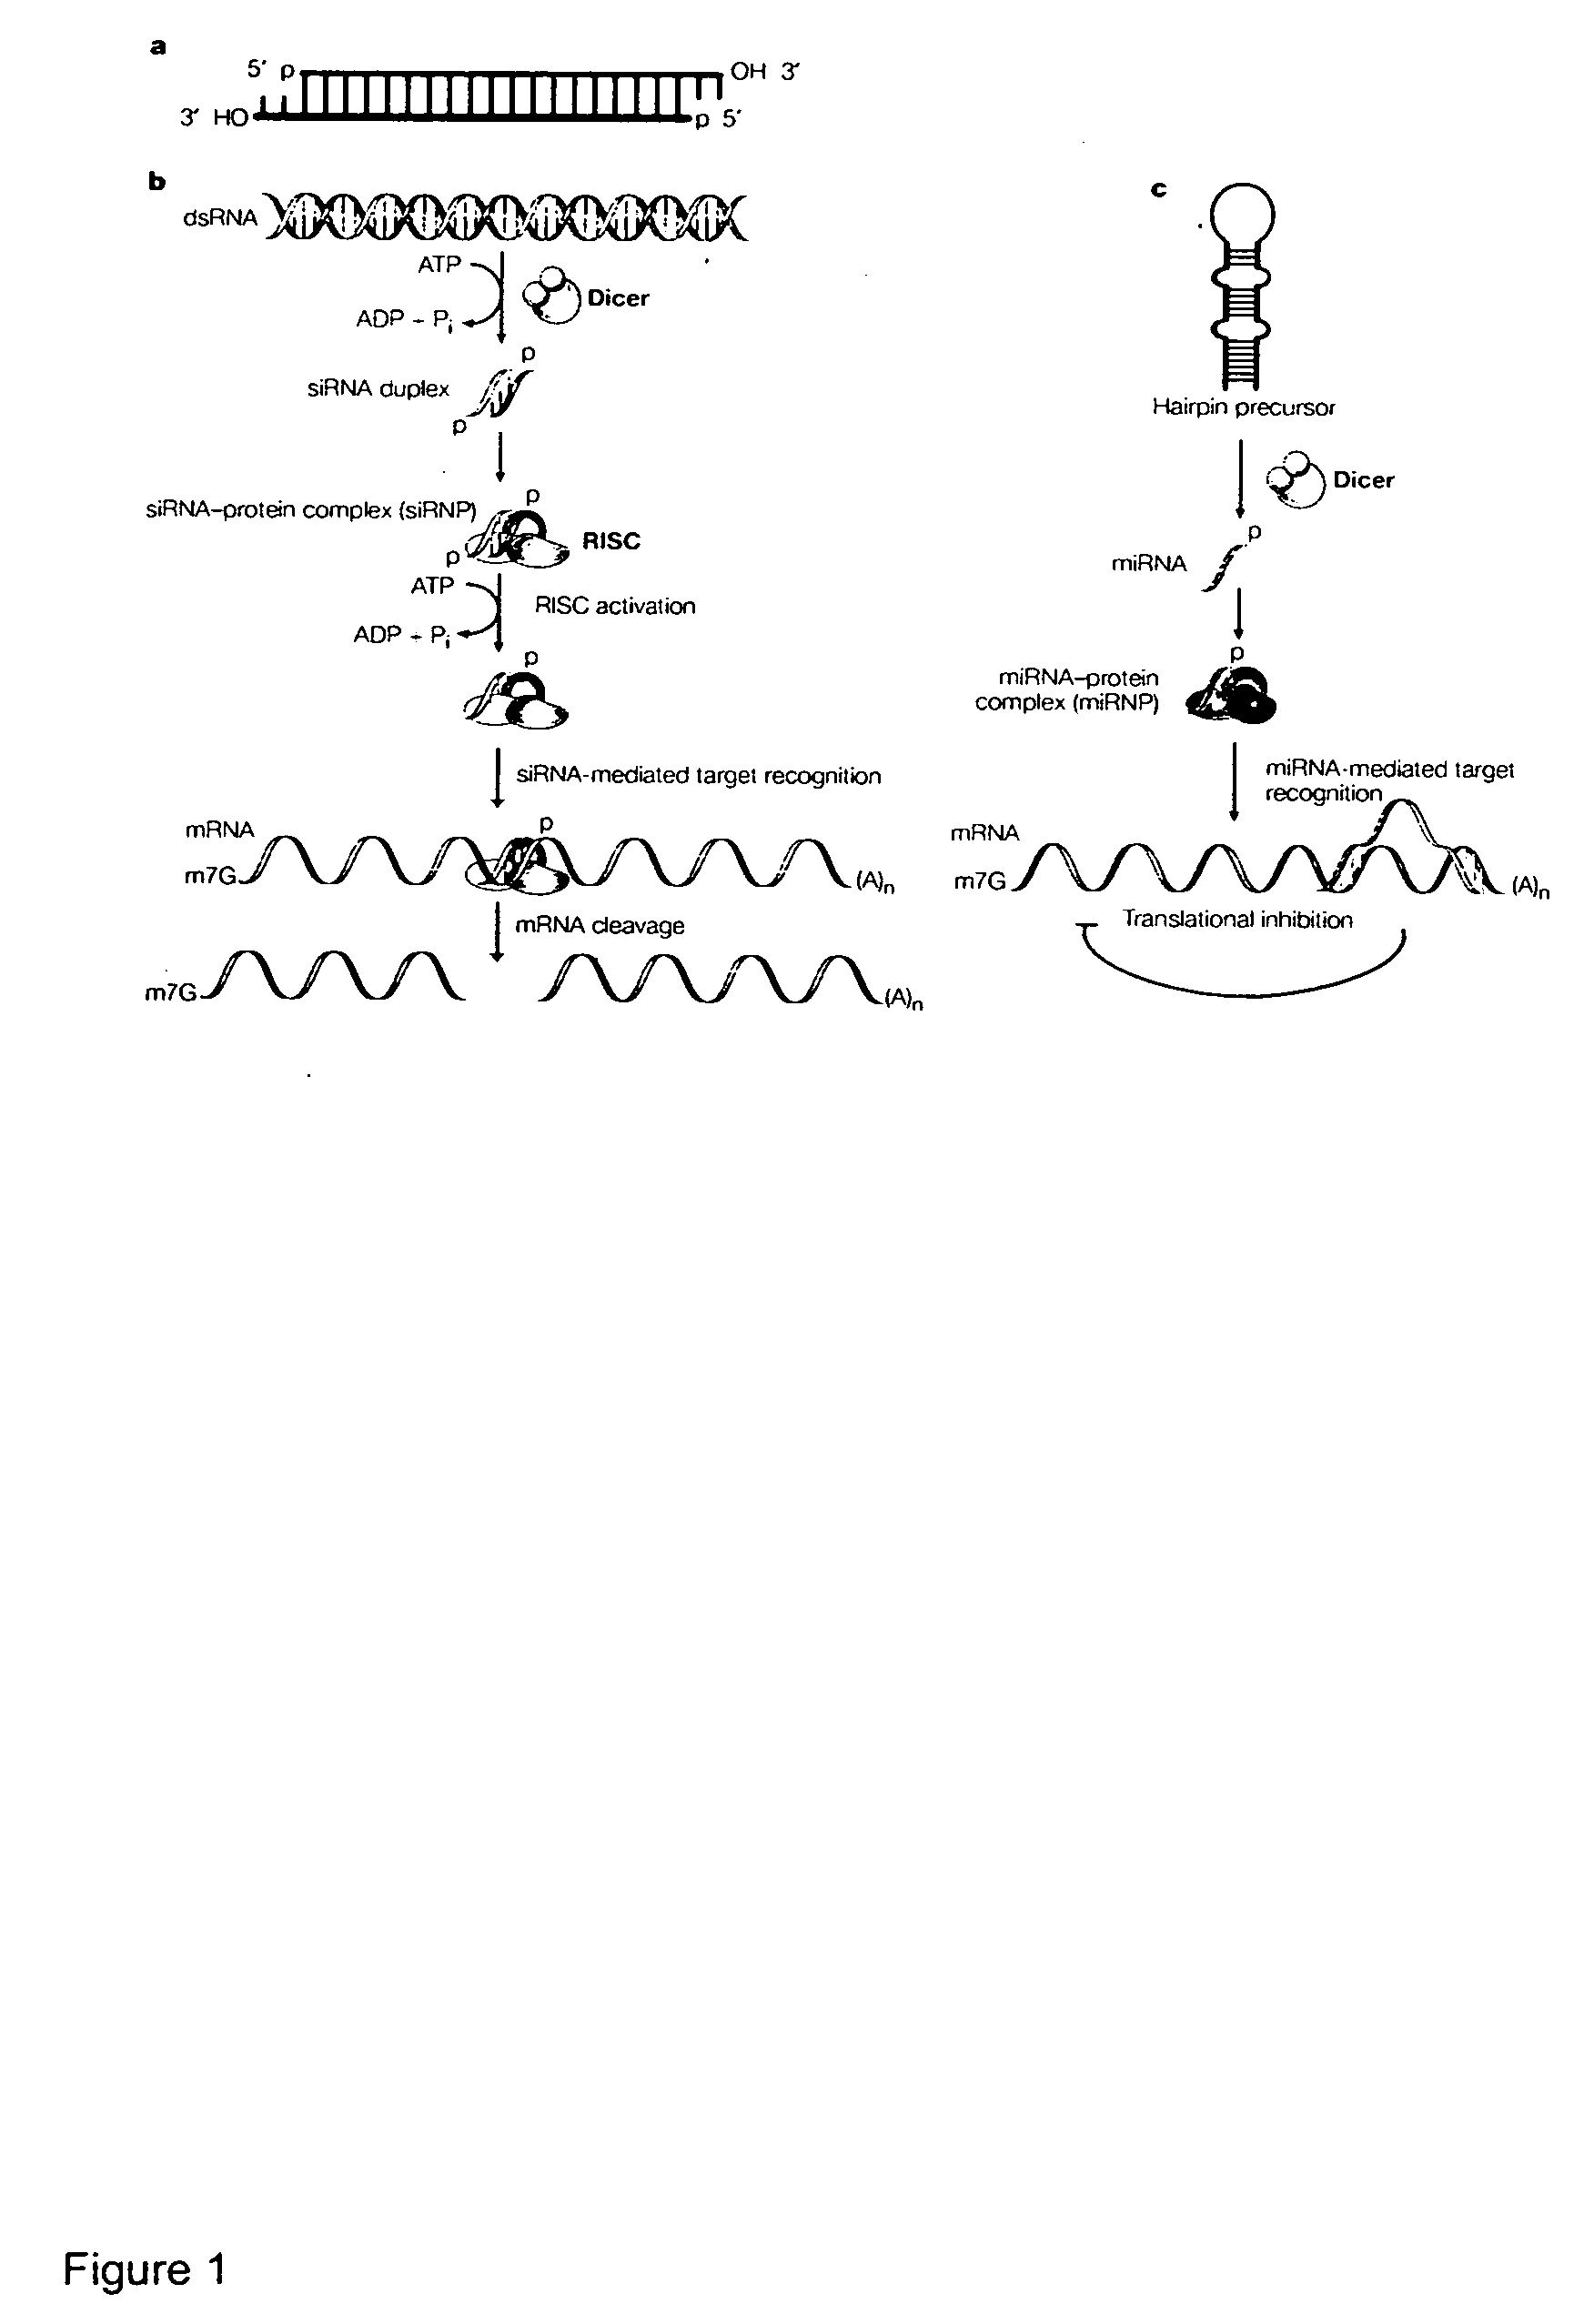 Reagents and methods for identification of RNAi pathway genes and chemical modulators of RNAi